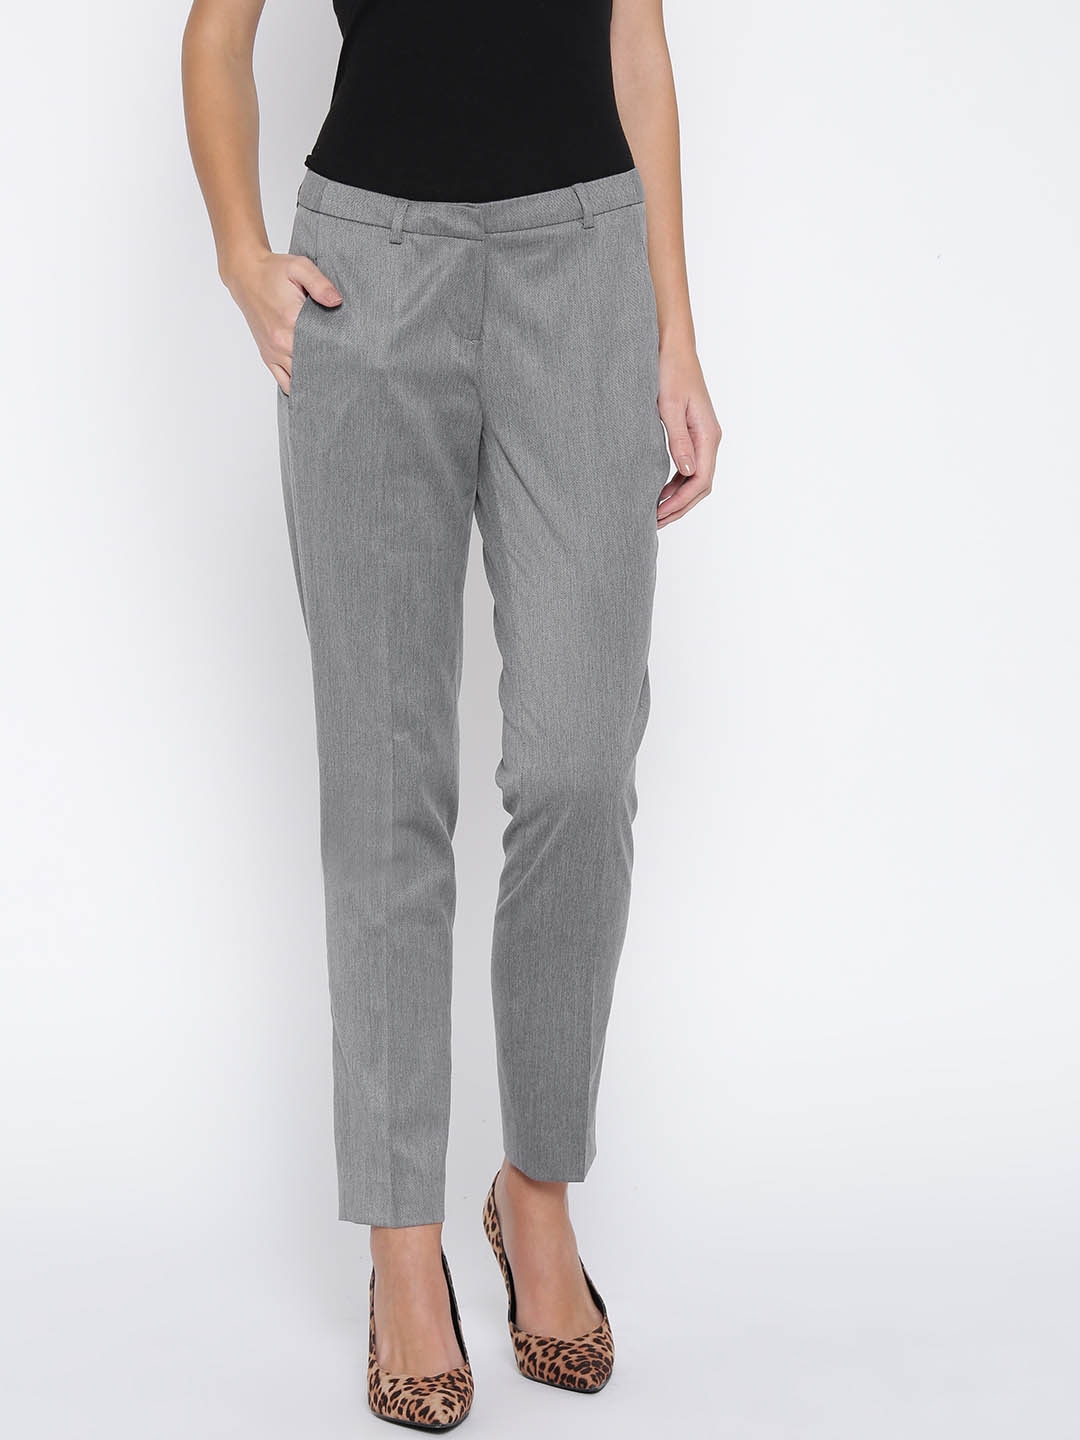 HPNS MART  Wills Lifestyle Women Charcoal Grey Slim Fit Solid Formal  Trousers